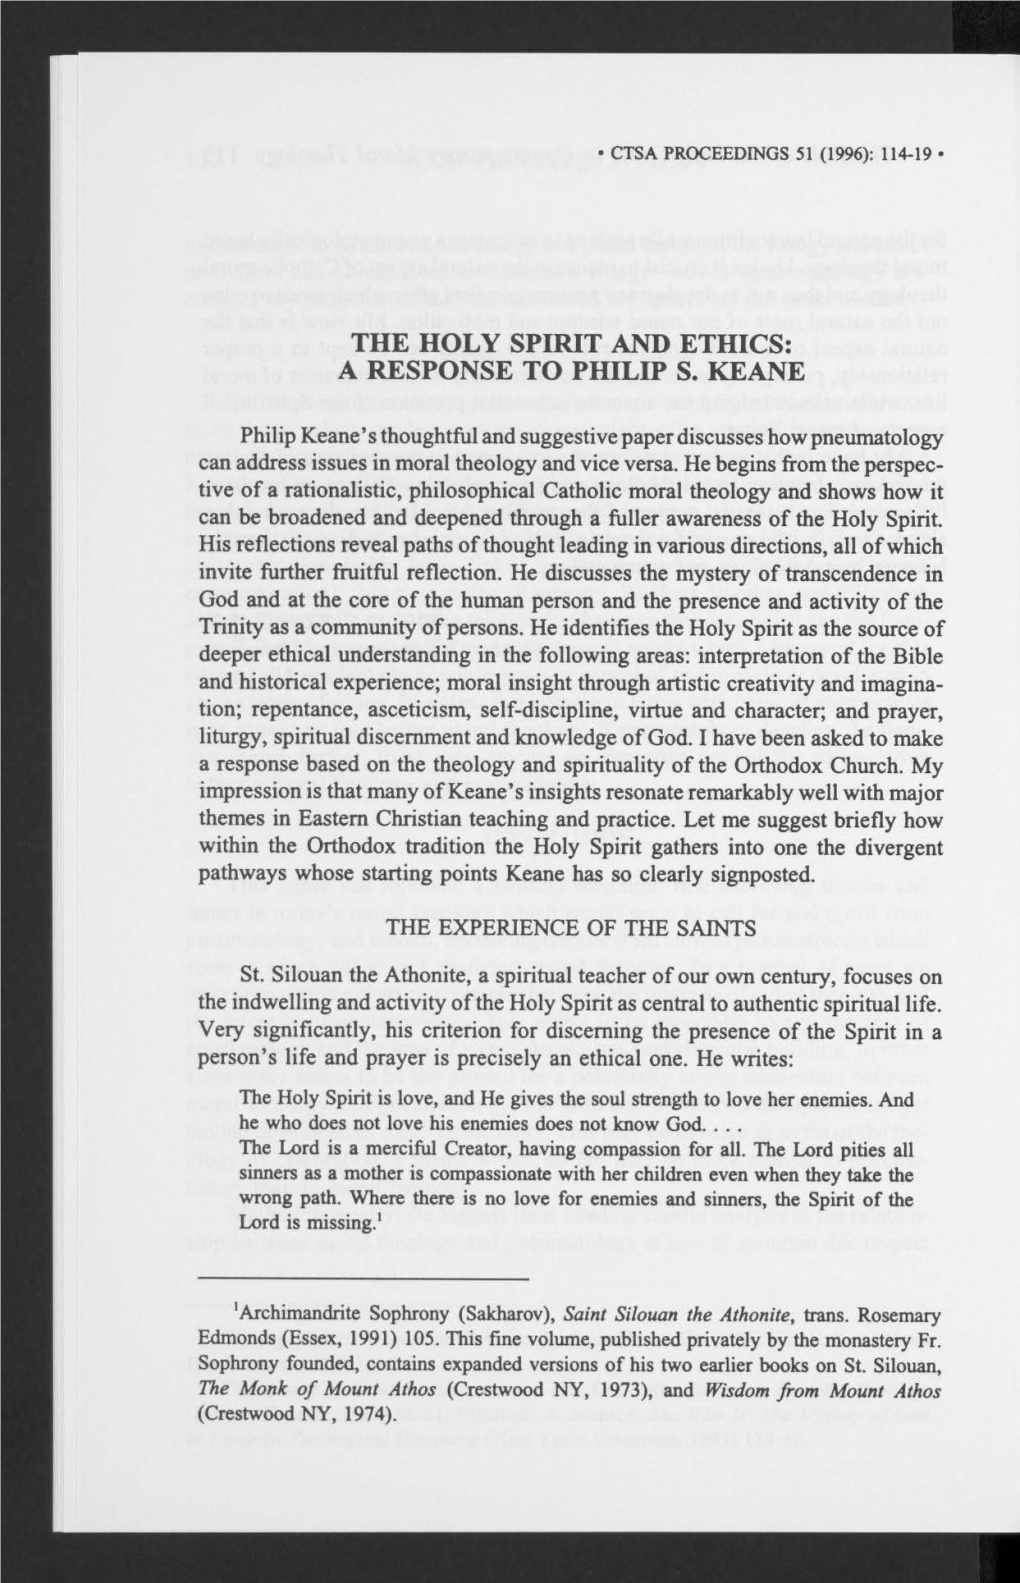 The Holy Spirit and Ethics: a Response to Philip S. Keane